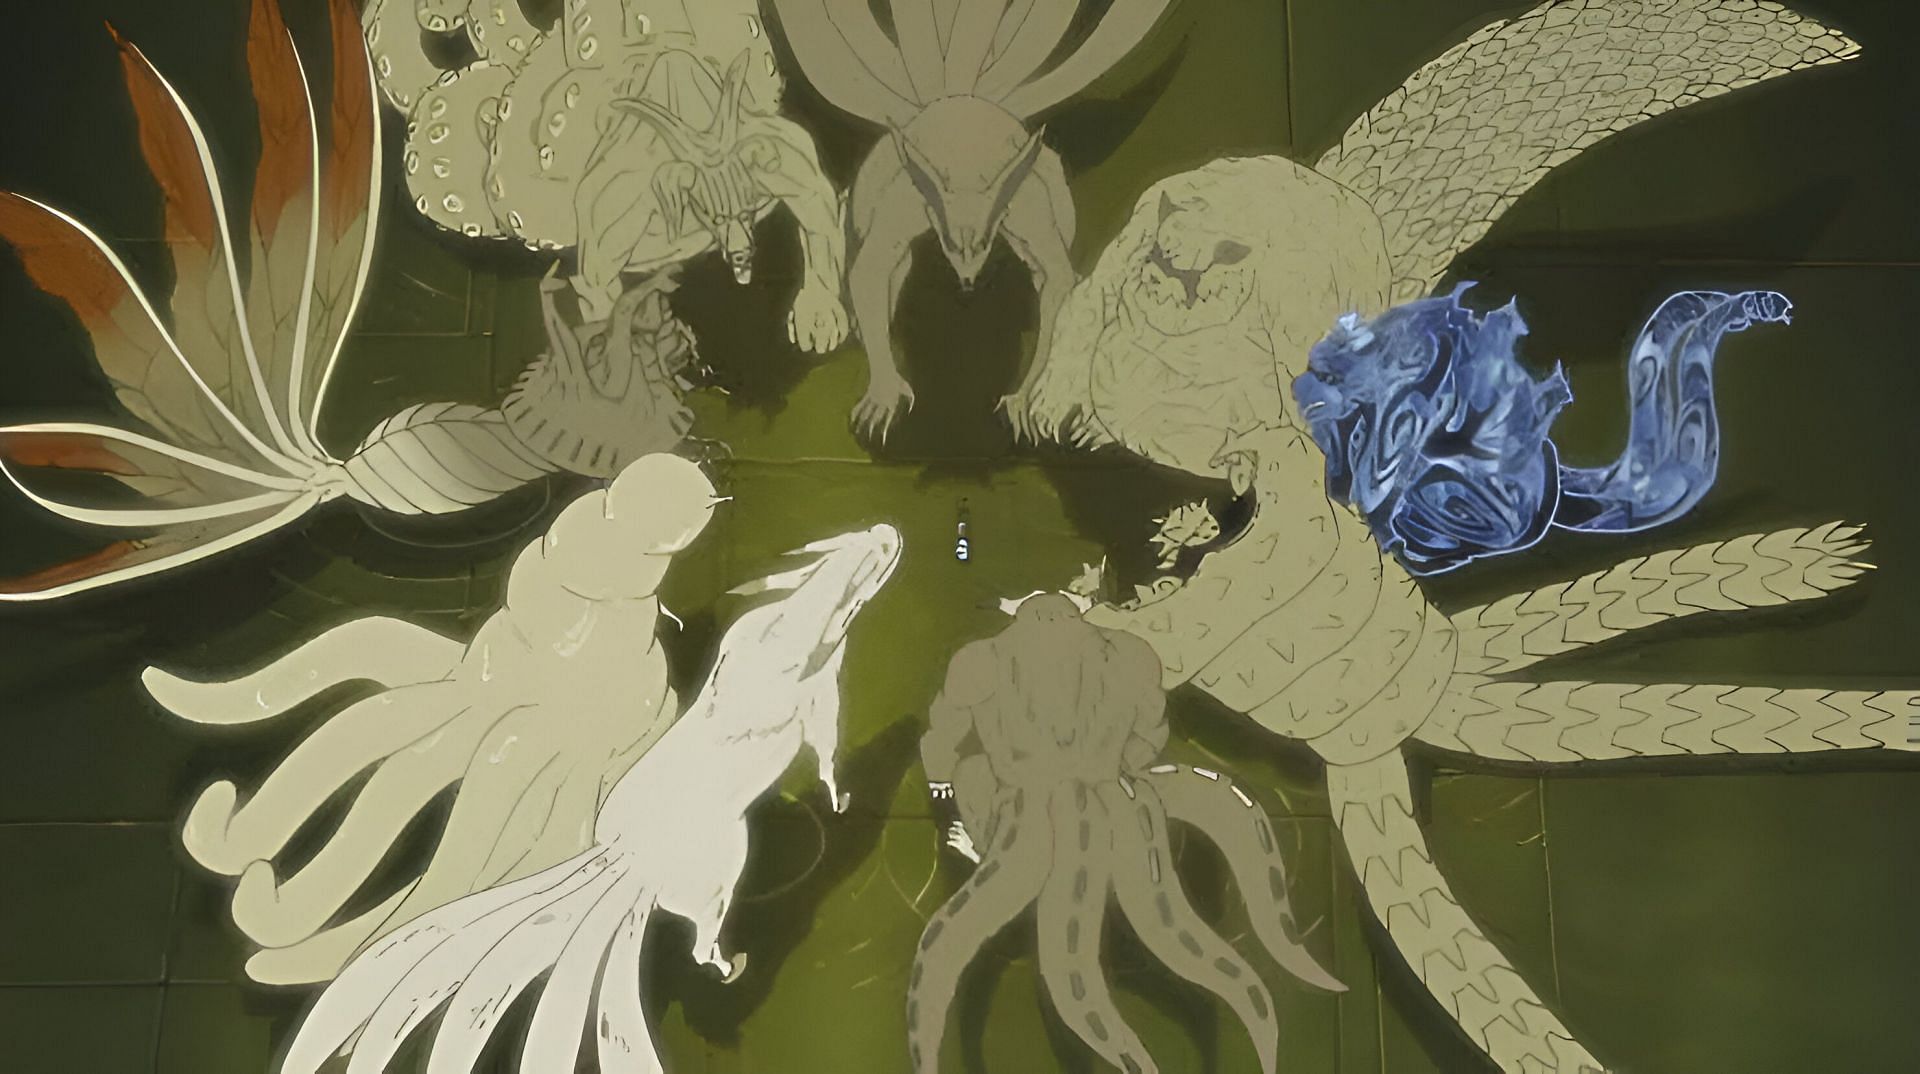 The tailed beasts as seen in the anime (Image via Studio Pierrot)